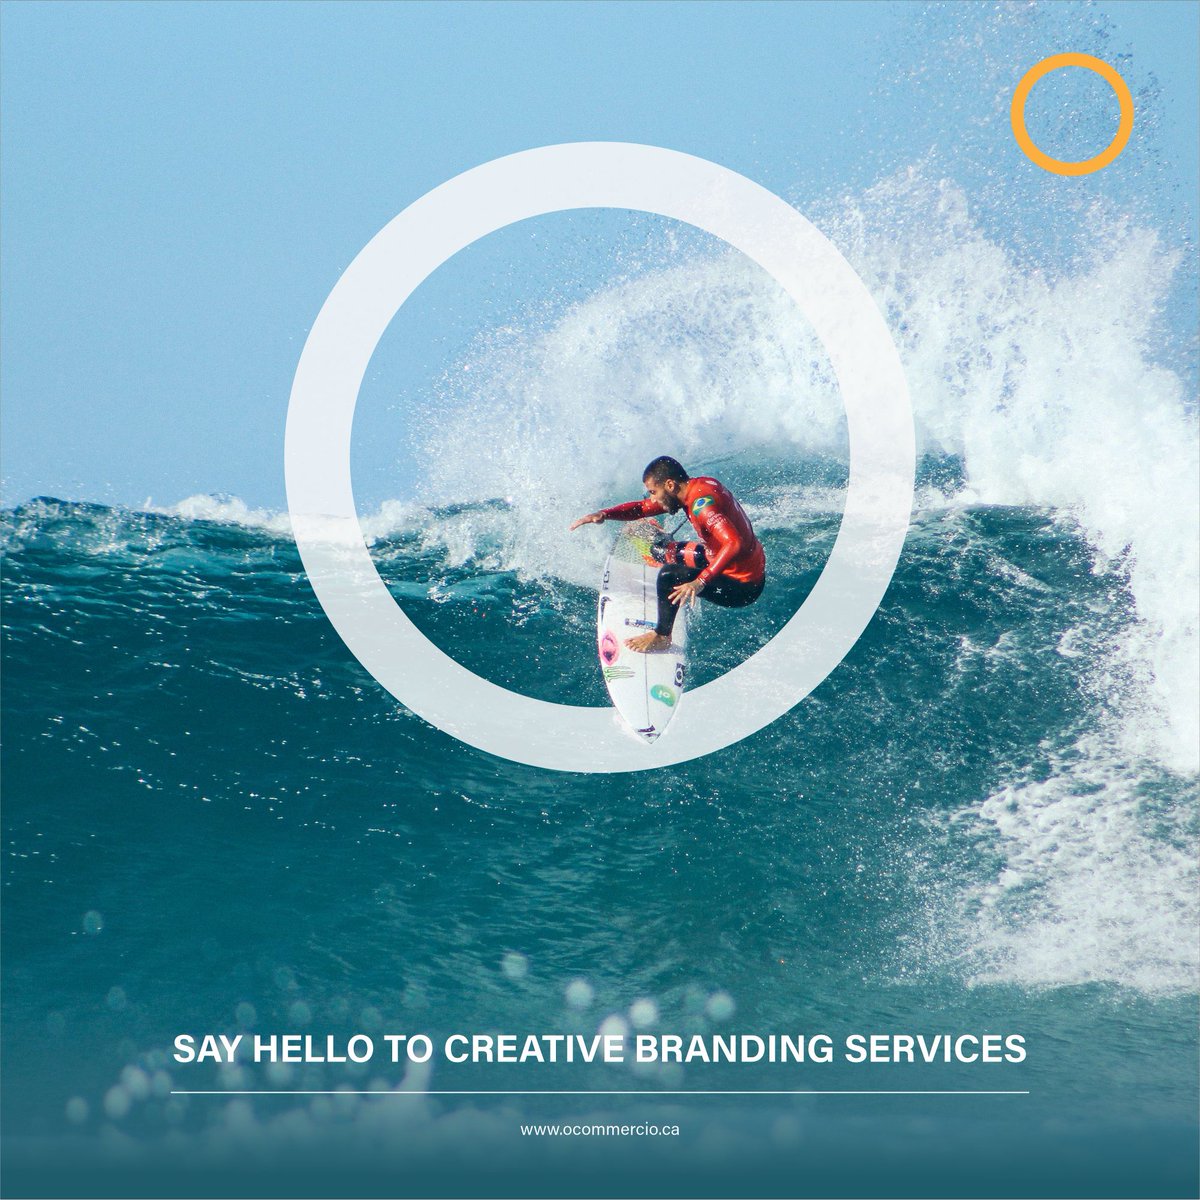 “Logic will get you from A to B. Imagination will take you everywhere.” —Albert Einstein

Ride the creative wave. Ride the wave of change with branding and advertising services from O Commercio.

#theocommerciophilosophy #waterloocanada #brandingstudio #brandingagency